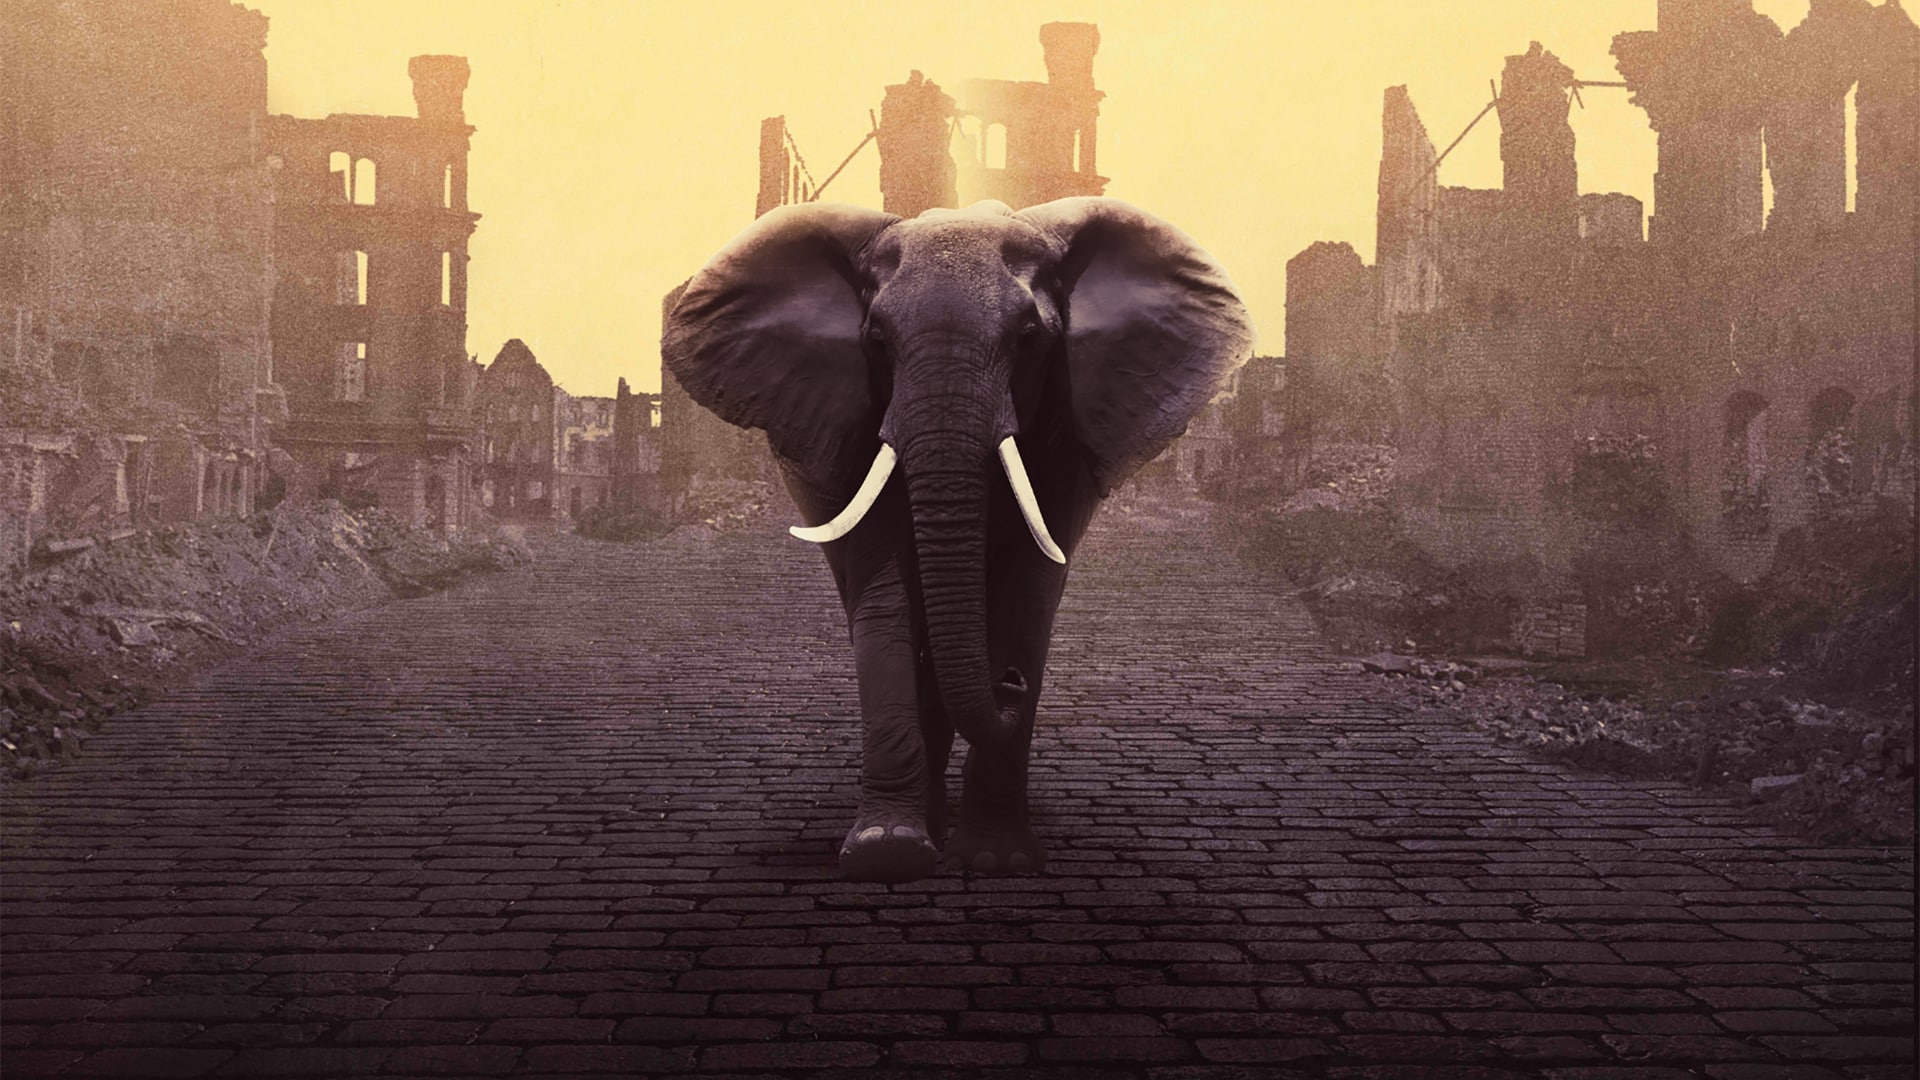 An elephant walking through a town in ruins, yellow-hued background.